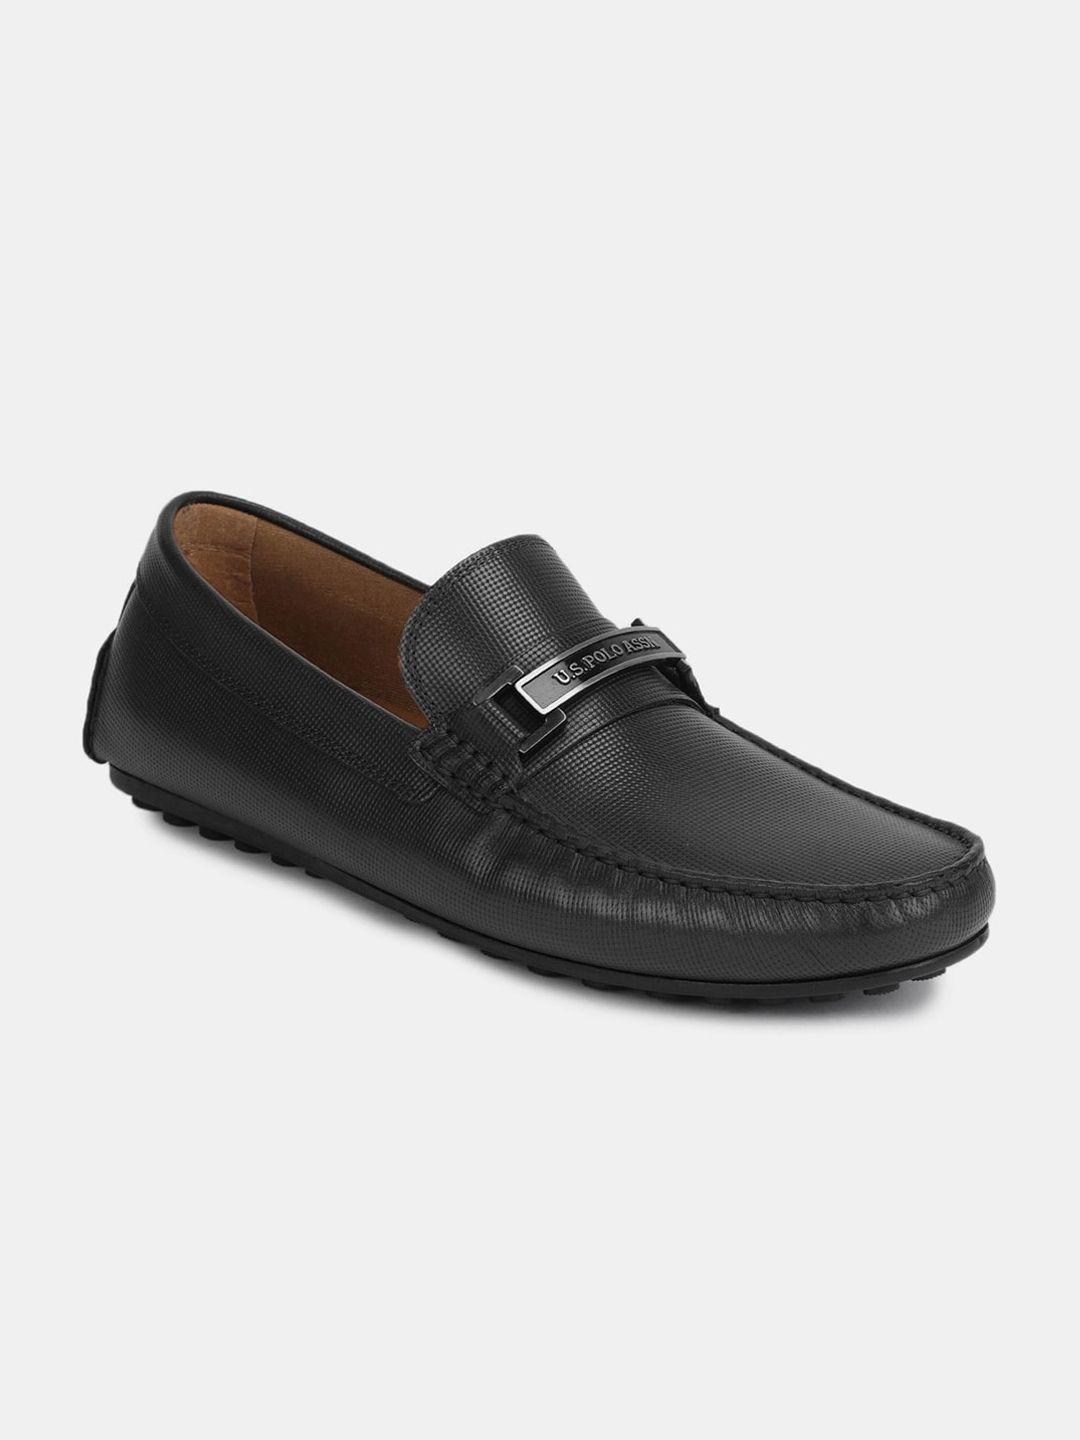 u-s-polo-assn-men-black-textured-leather-driving-shoes